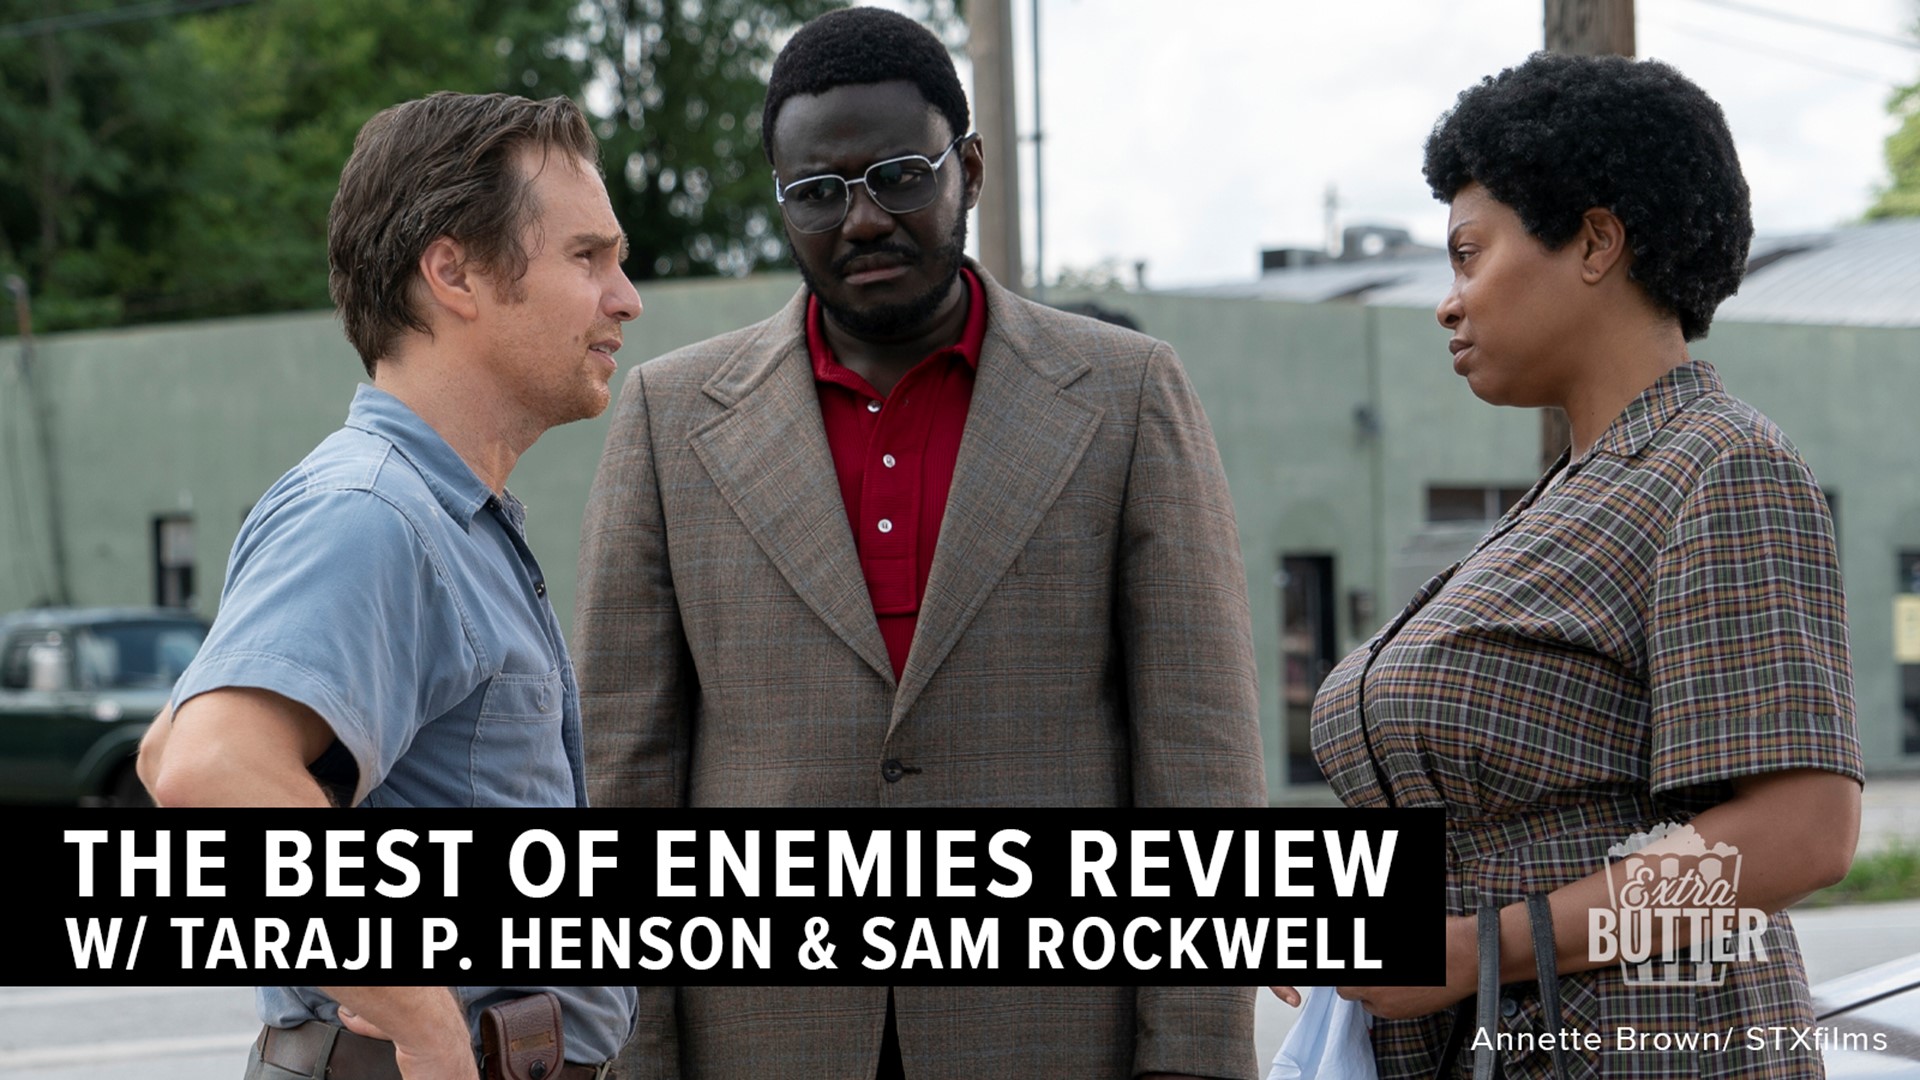 Hear from stars Taraji P. Henson and Sam Rockwell about the true story 'The Best of Enemies.' Taraji tells Mark S. Allen about why she is so passionate about the film and the day on set that landed her in the hospital. Sam talks about what it was like on set while filming the movie. Interview arranged by STXfilms.